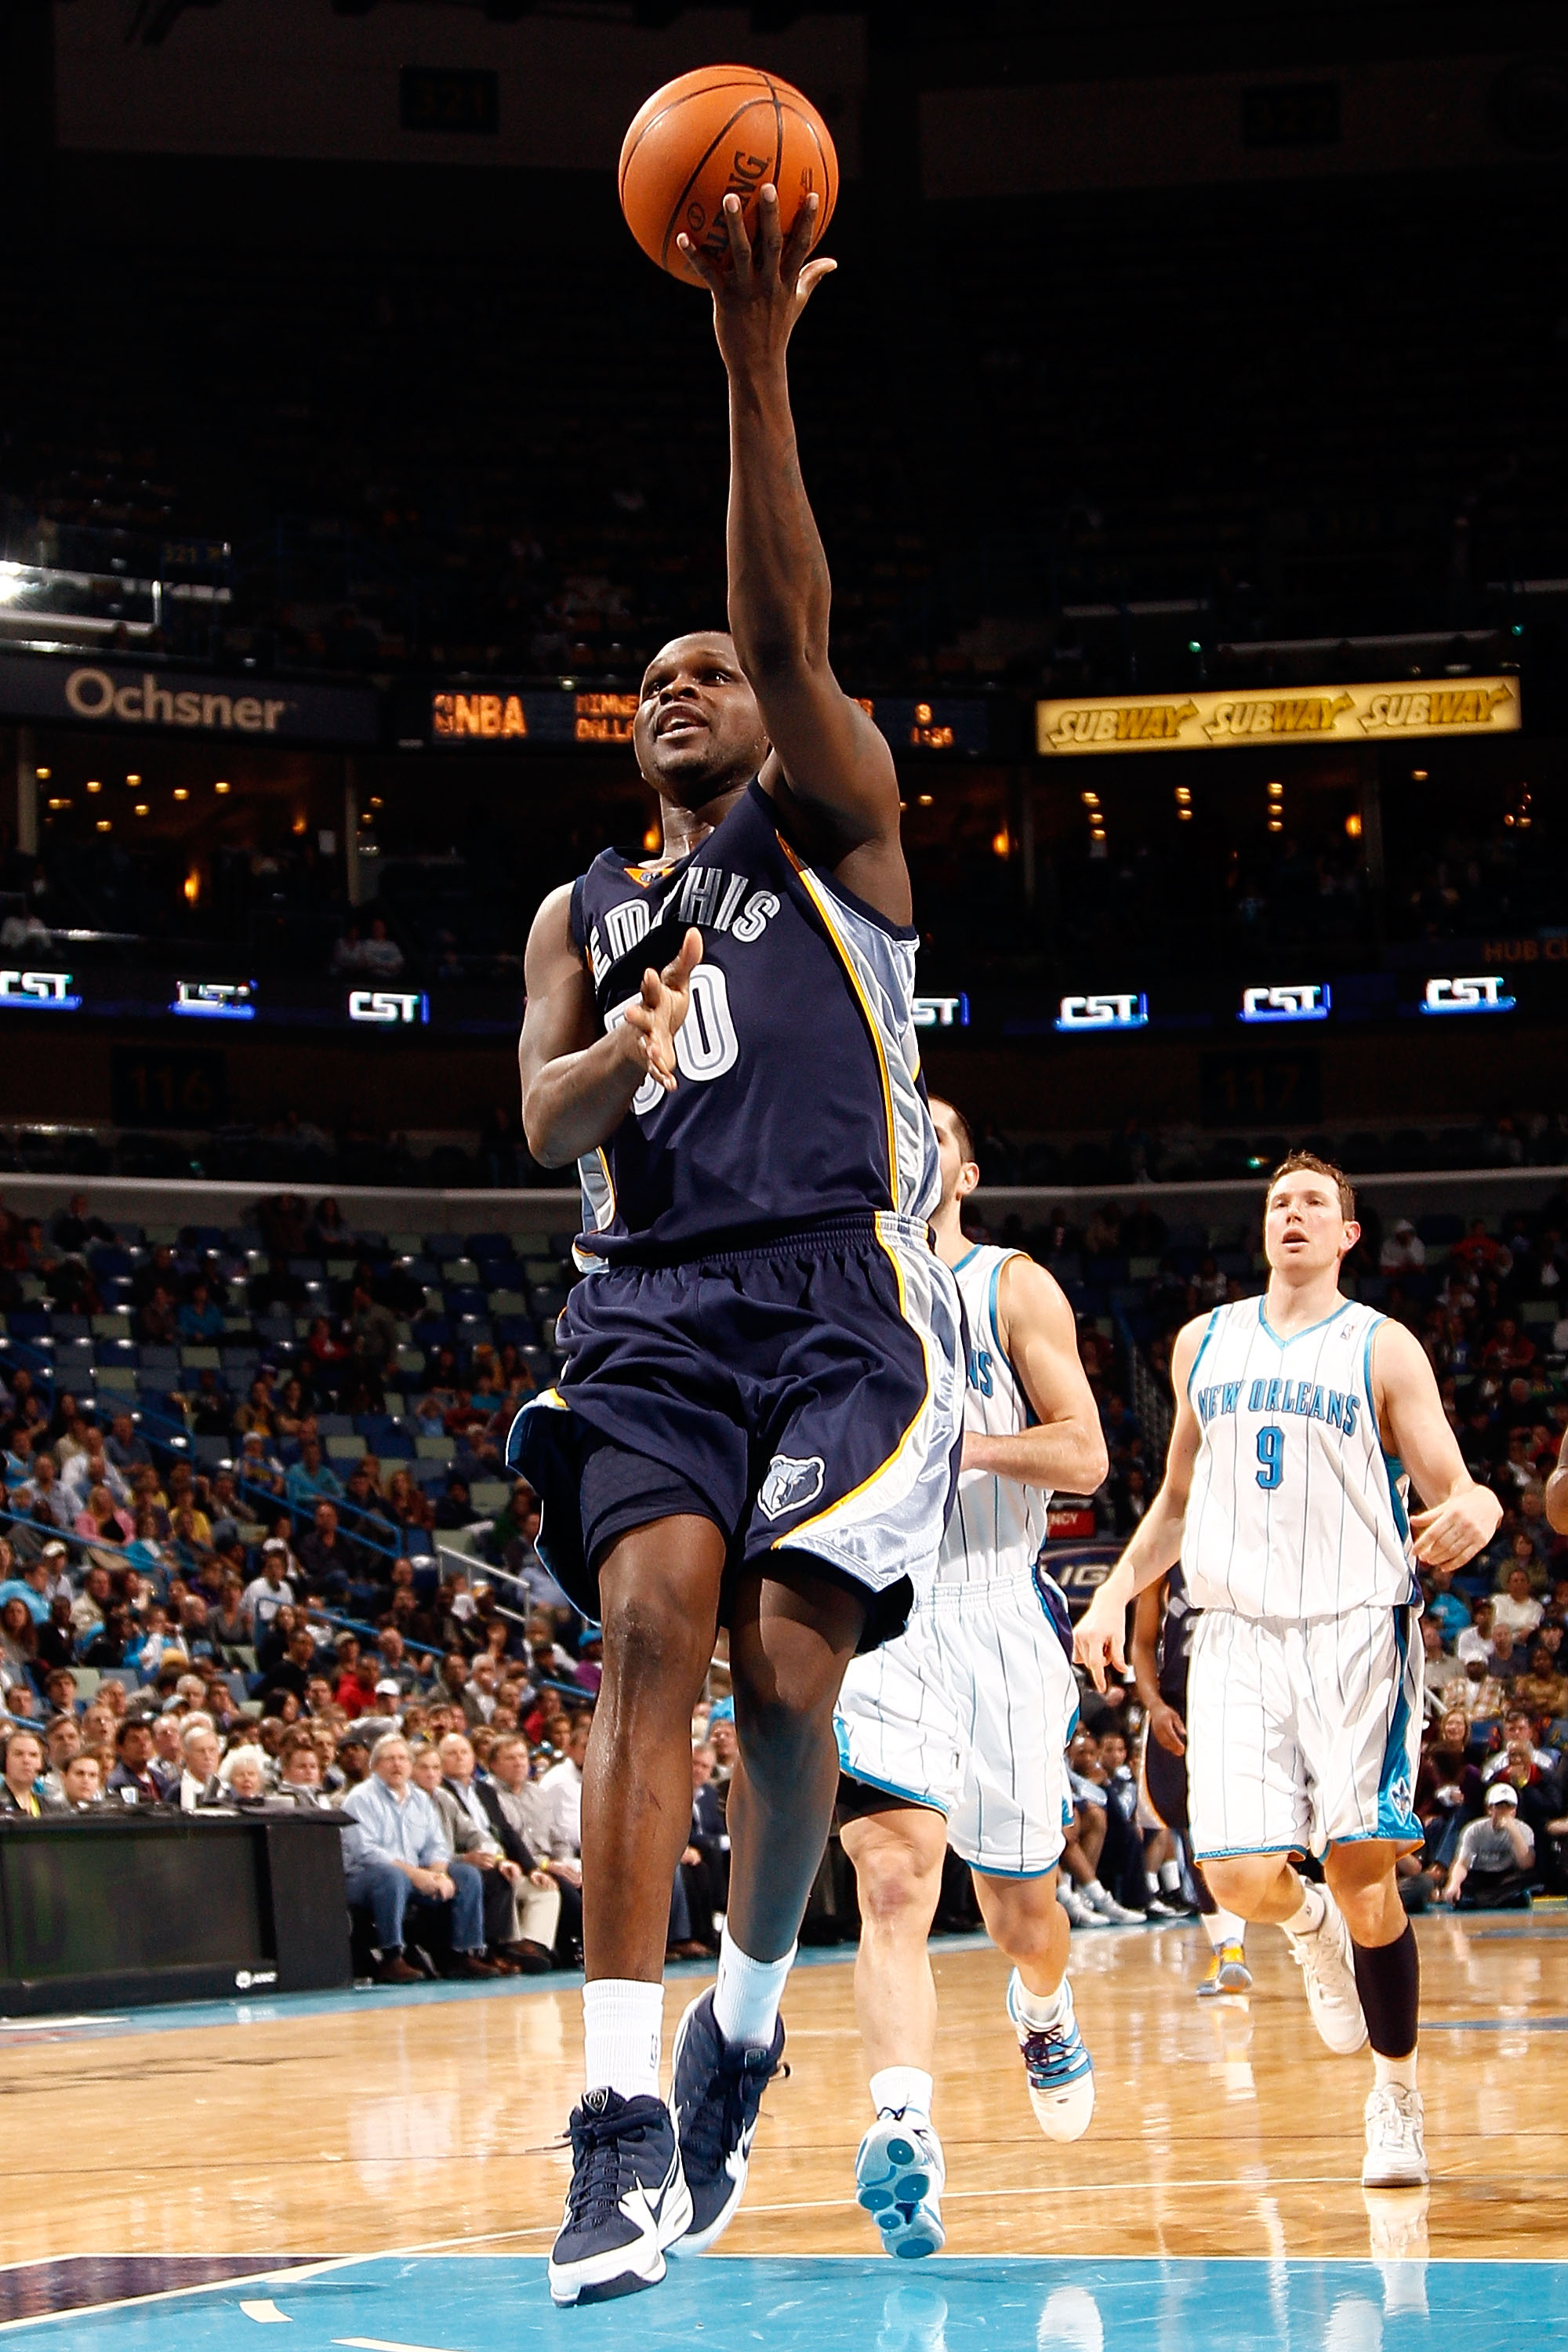 NEW ORLEANS - MARCH 03:  Zach Randolph #50 of the Memphis Grizzlies makes a shot against the New Orleans Hornets at the New Orleans Arena on March 3, 2010 in New Orleans, Louisiana.  NOTE TO USER: User expressly acknowledges and agrees that, by downloadin